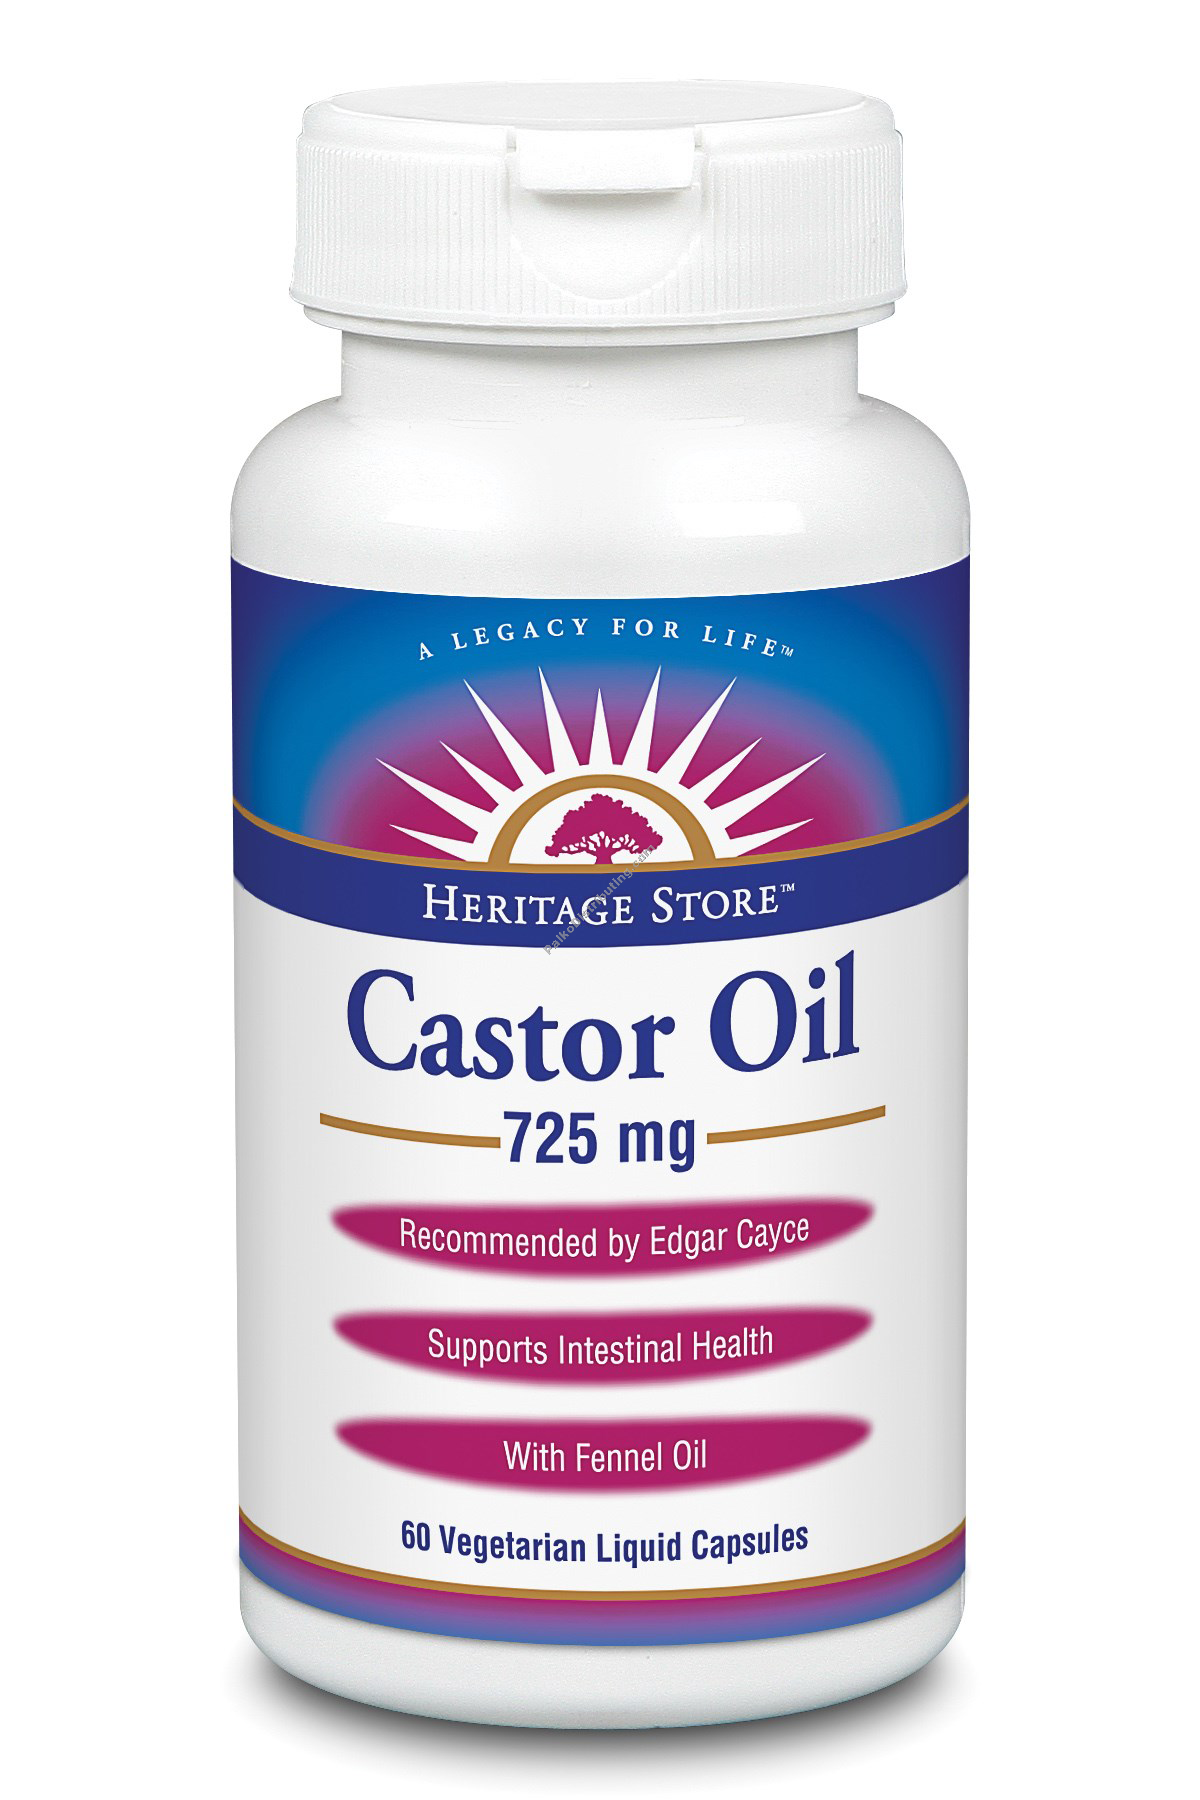 Product Image: Castor Oil 725mg